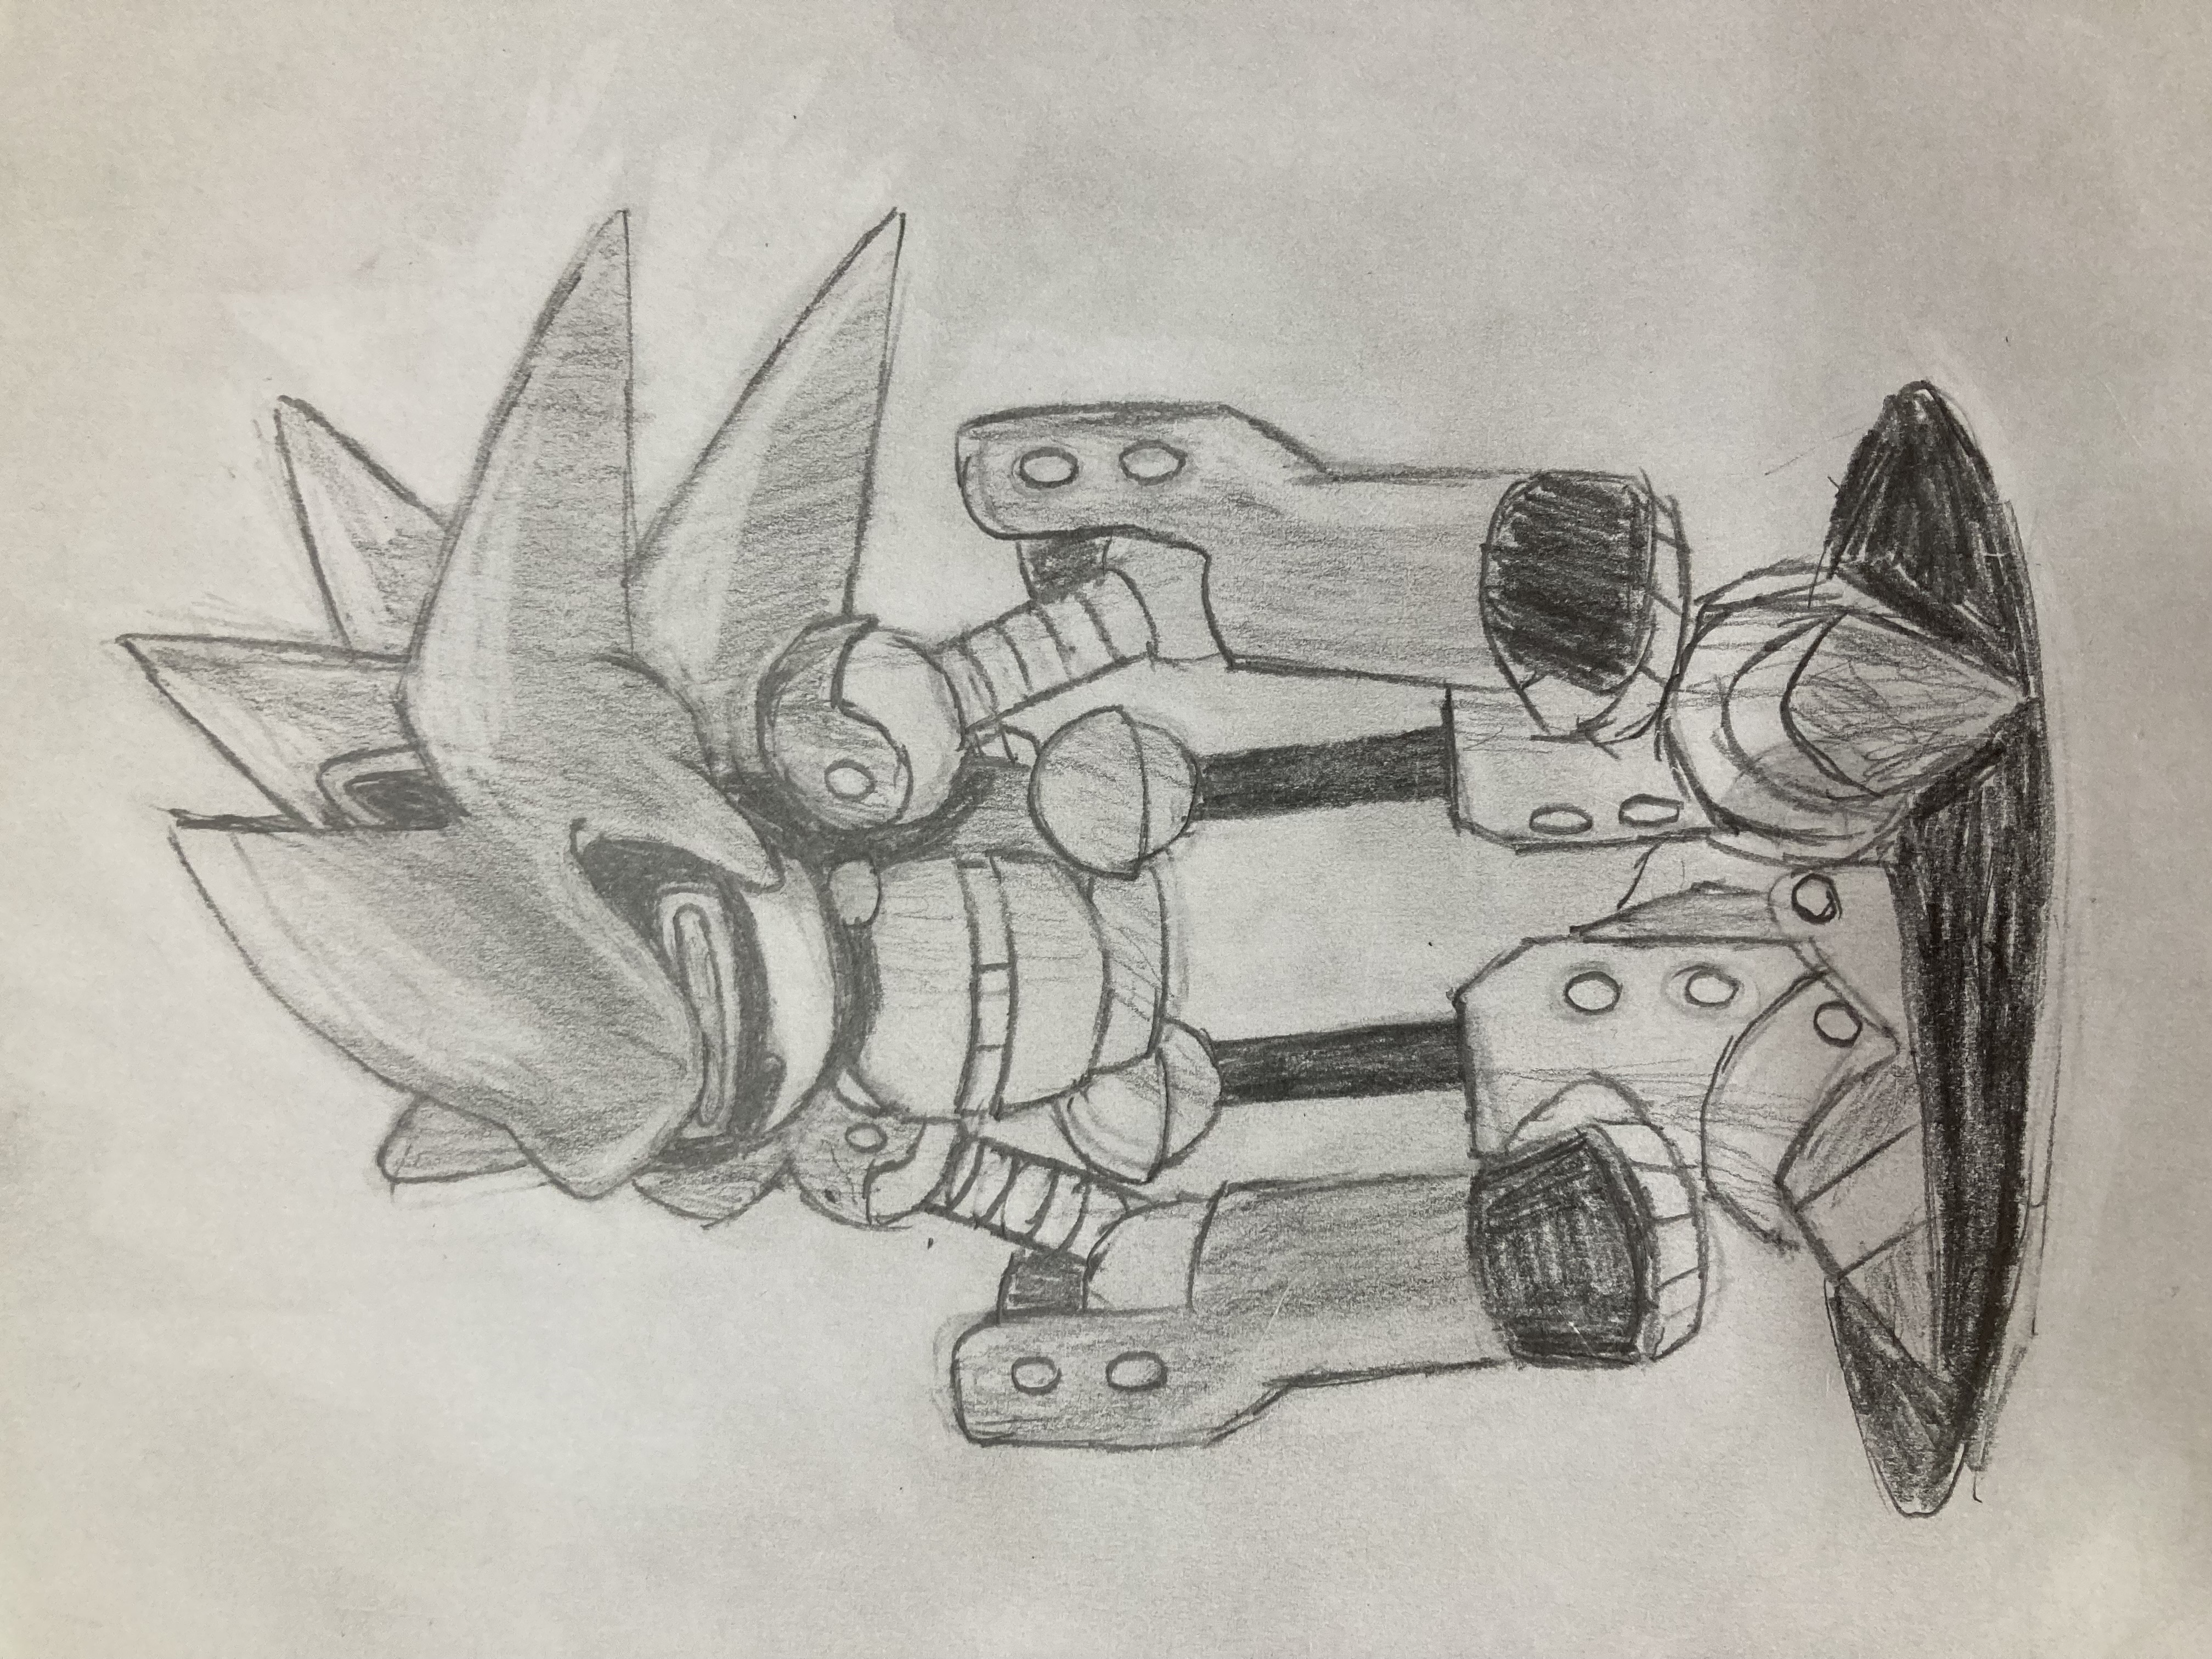 Mecha Sonic MkII' by Nomad-The-Hedgehog on DeviantArt